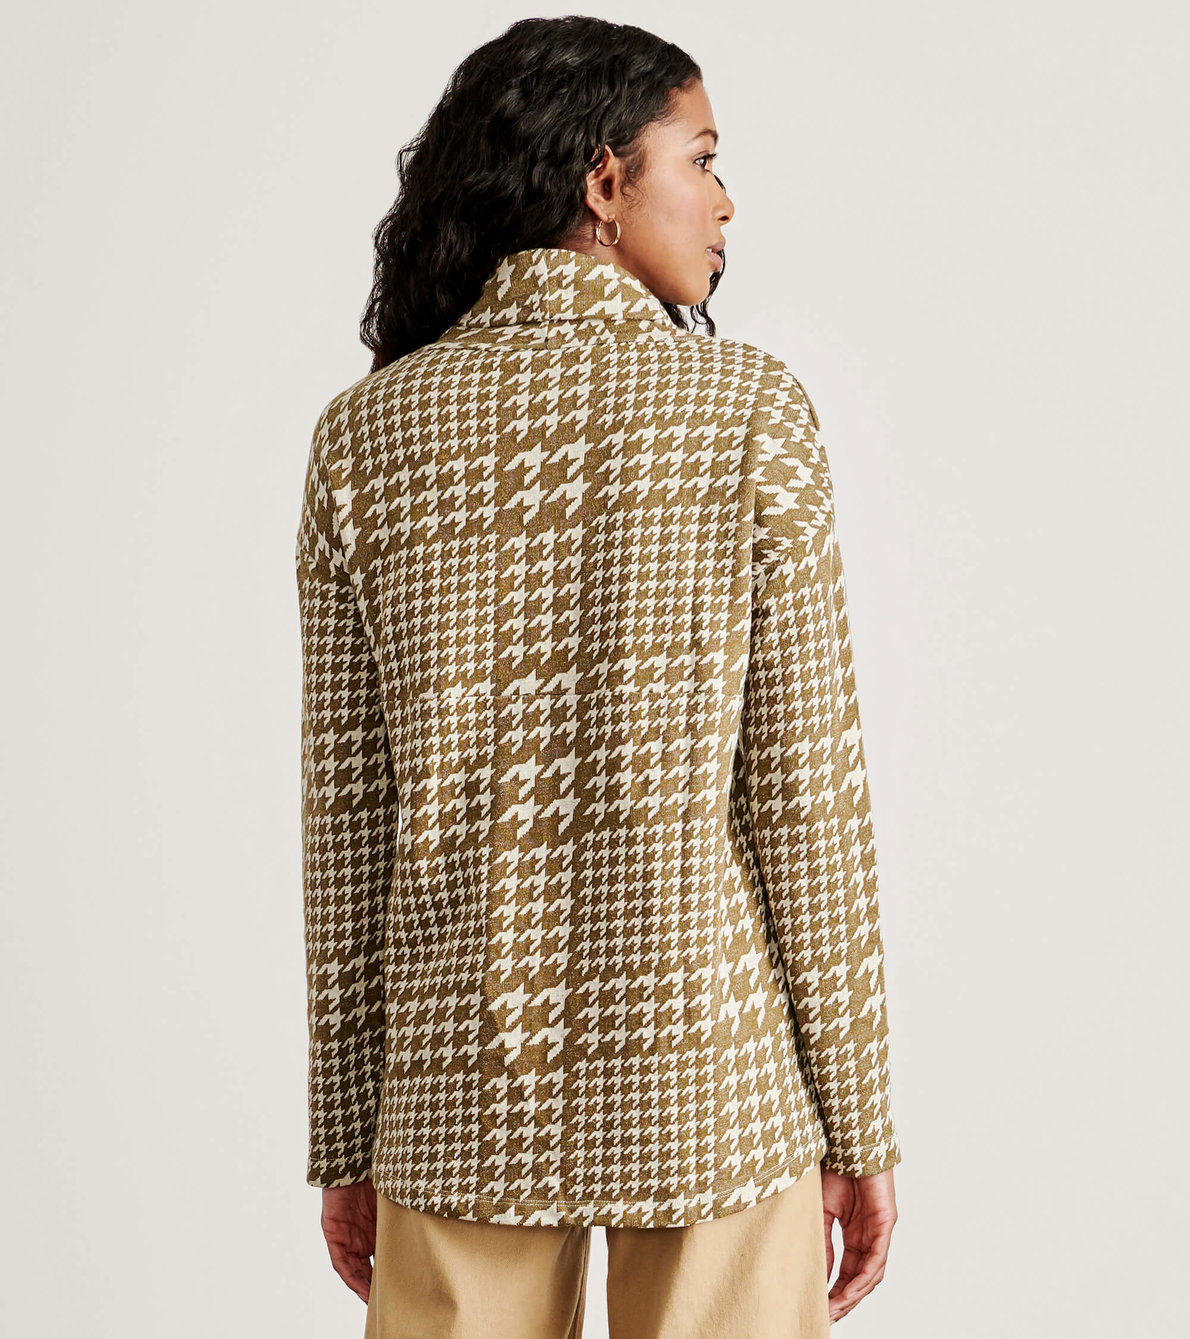 View larger image of Funnel Neck Top - Houndstooth Plaid